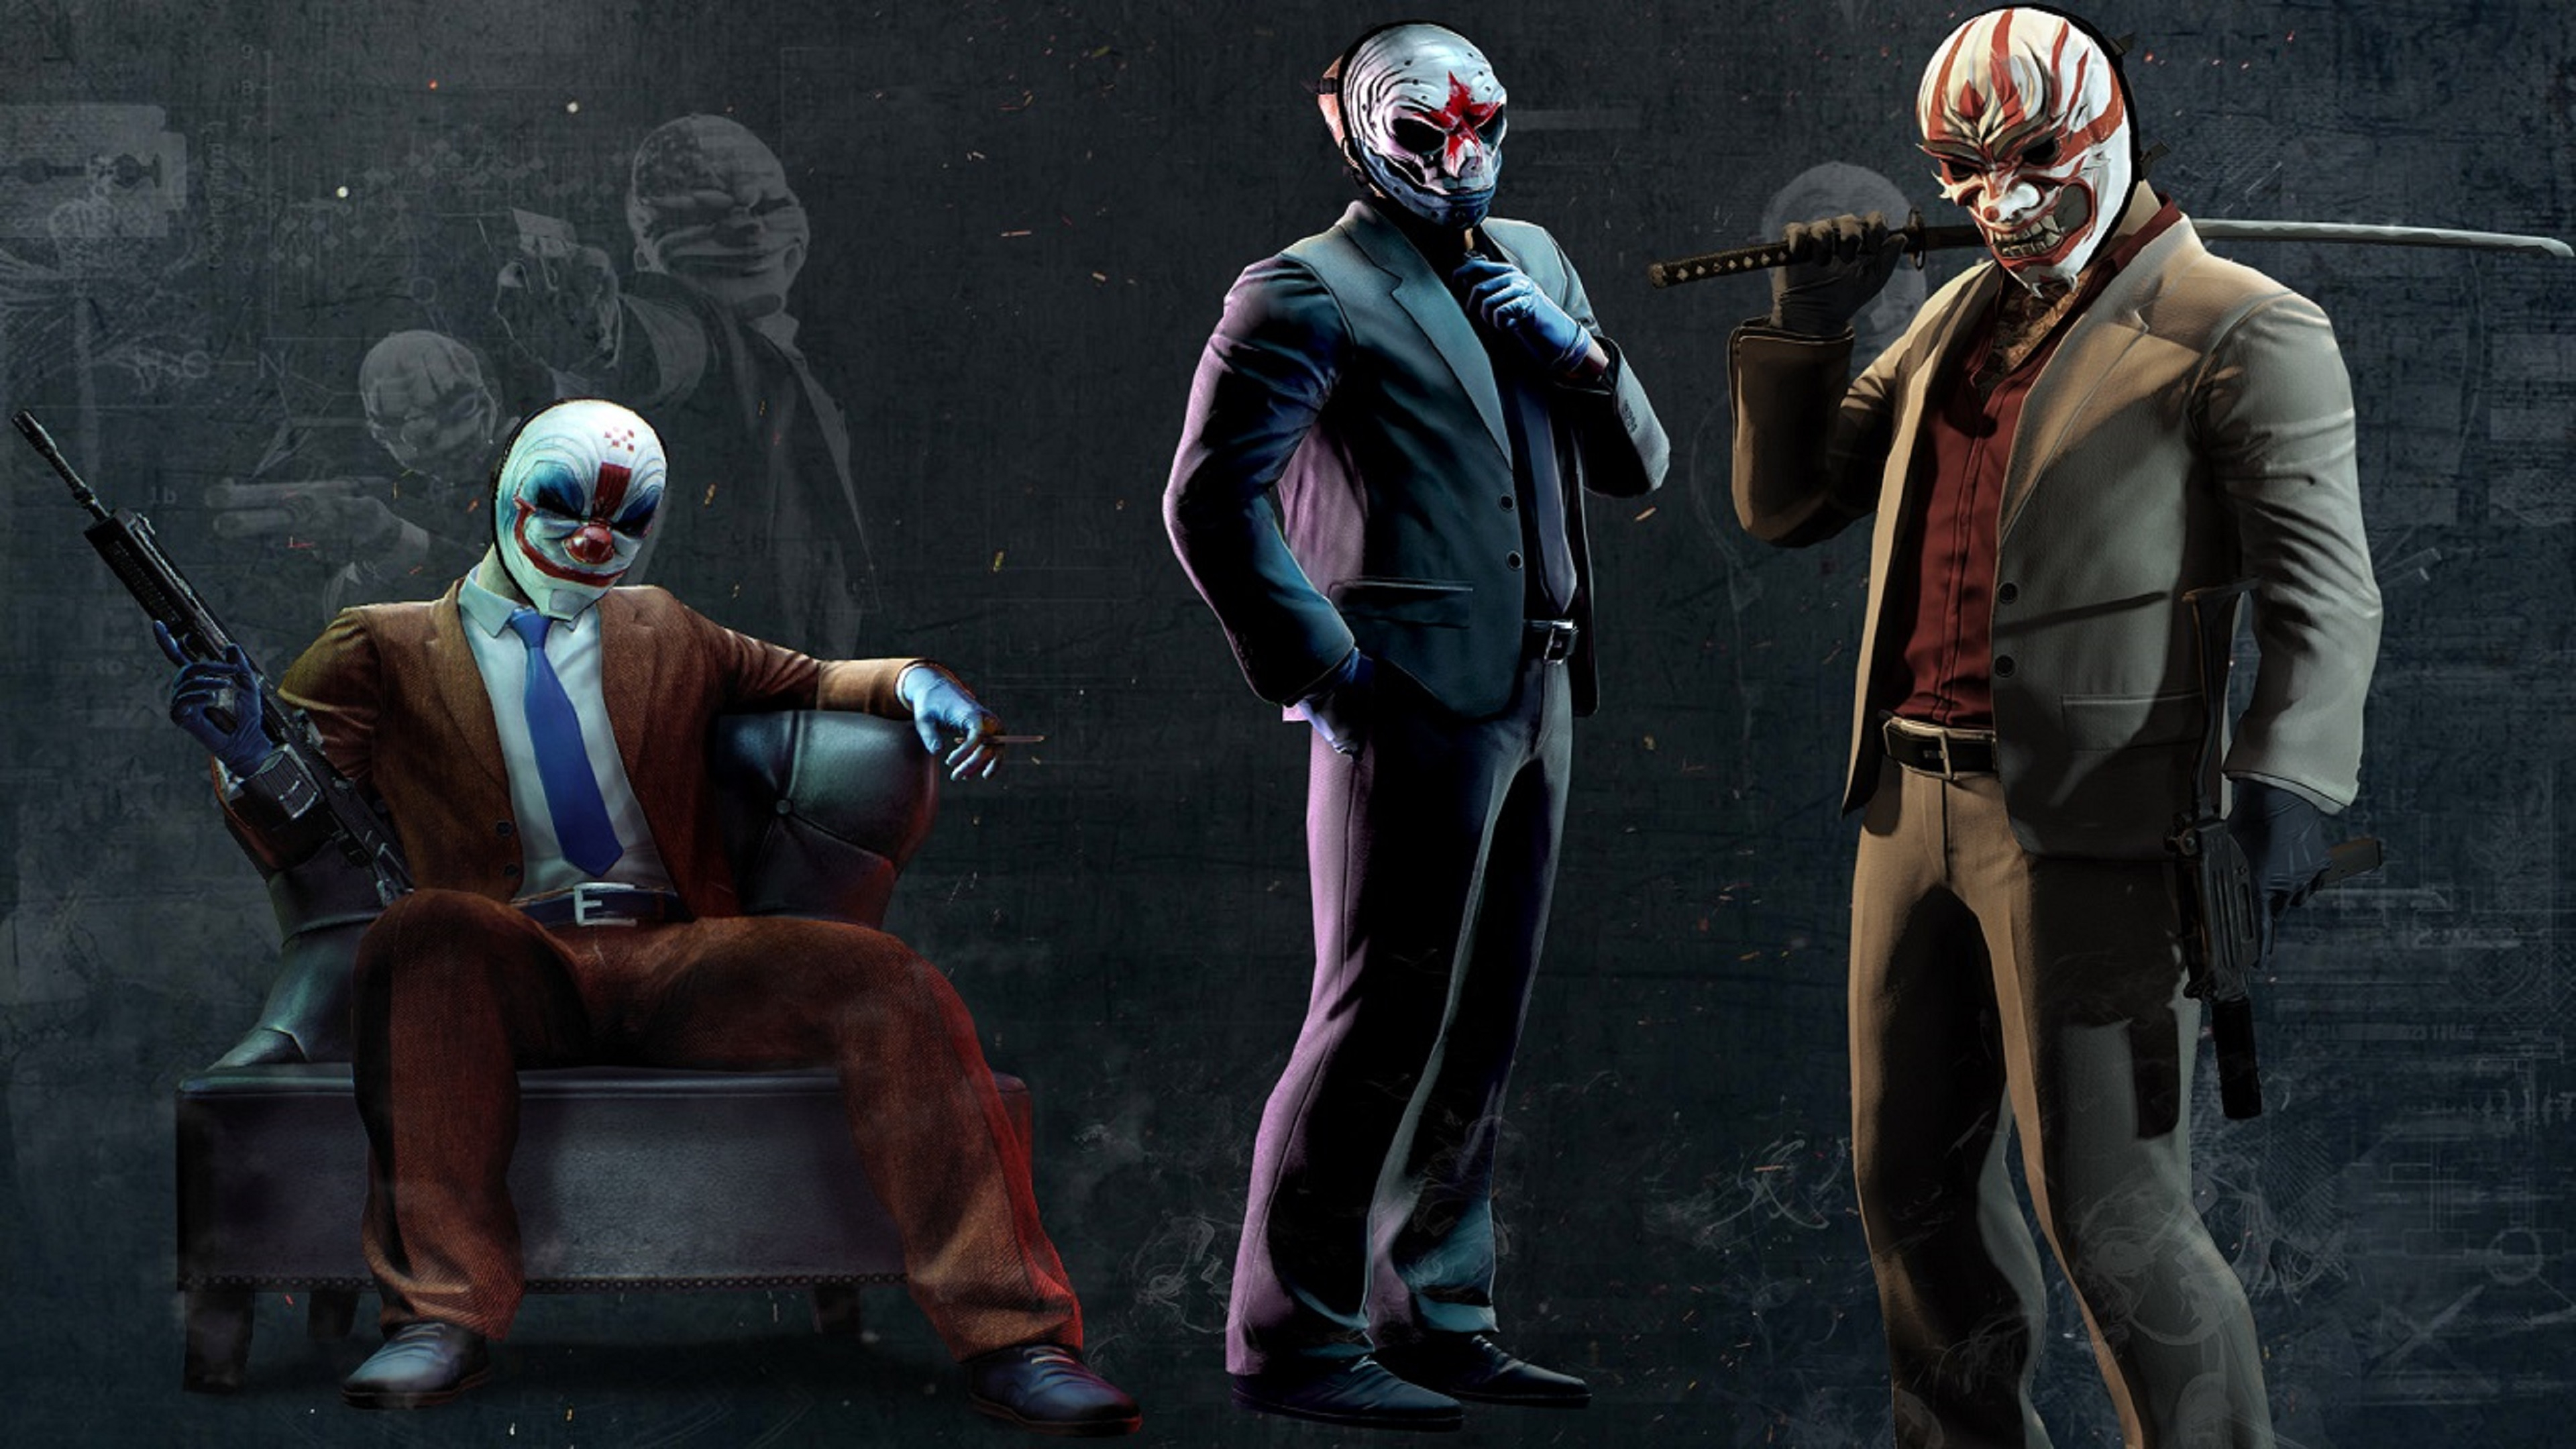 3840x2160 1600x1200 Payday 2 Artwork 2 1600x1200 Resolution HD 4k Wallpapers, Images, Backgrounds, Photos and Pictures